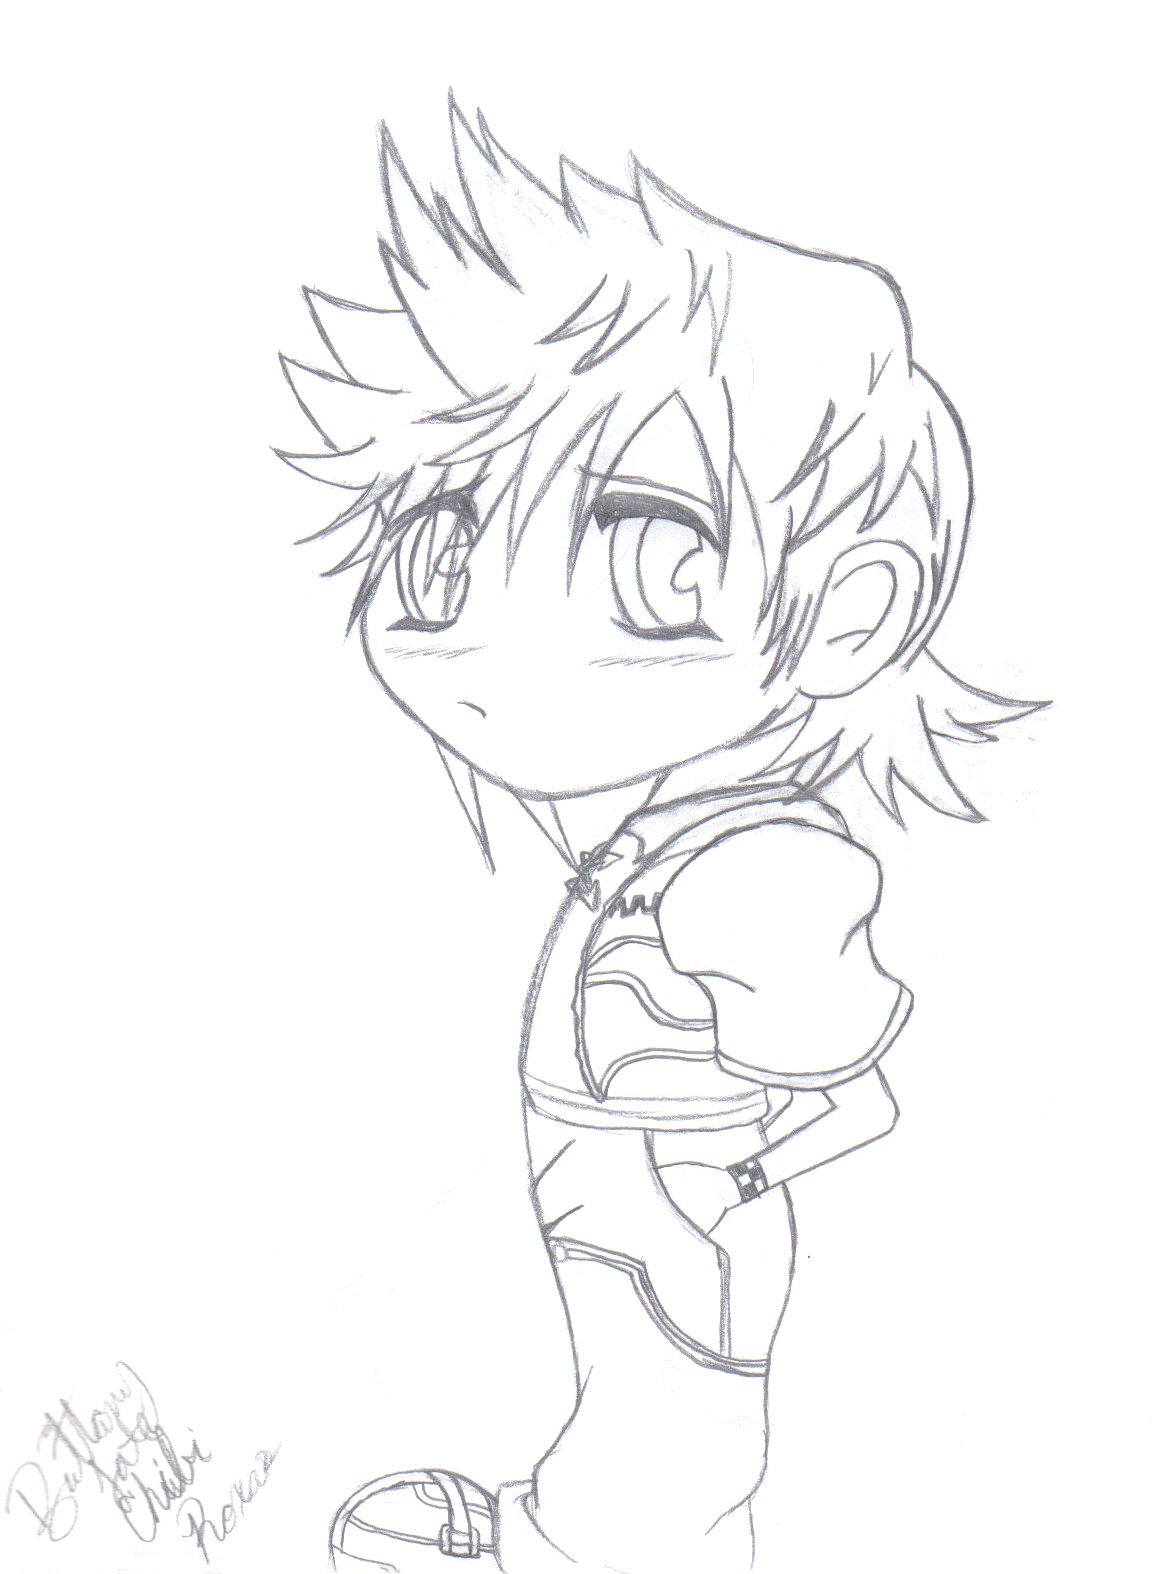 Chibi Roxas for Cloudsfan09 by Kaybe